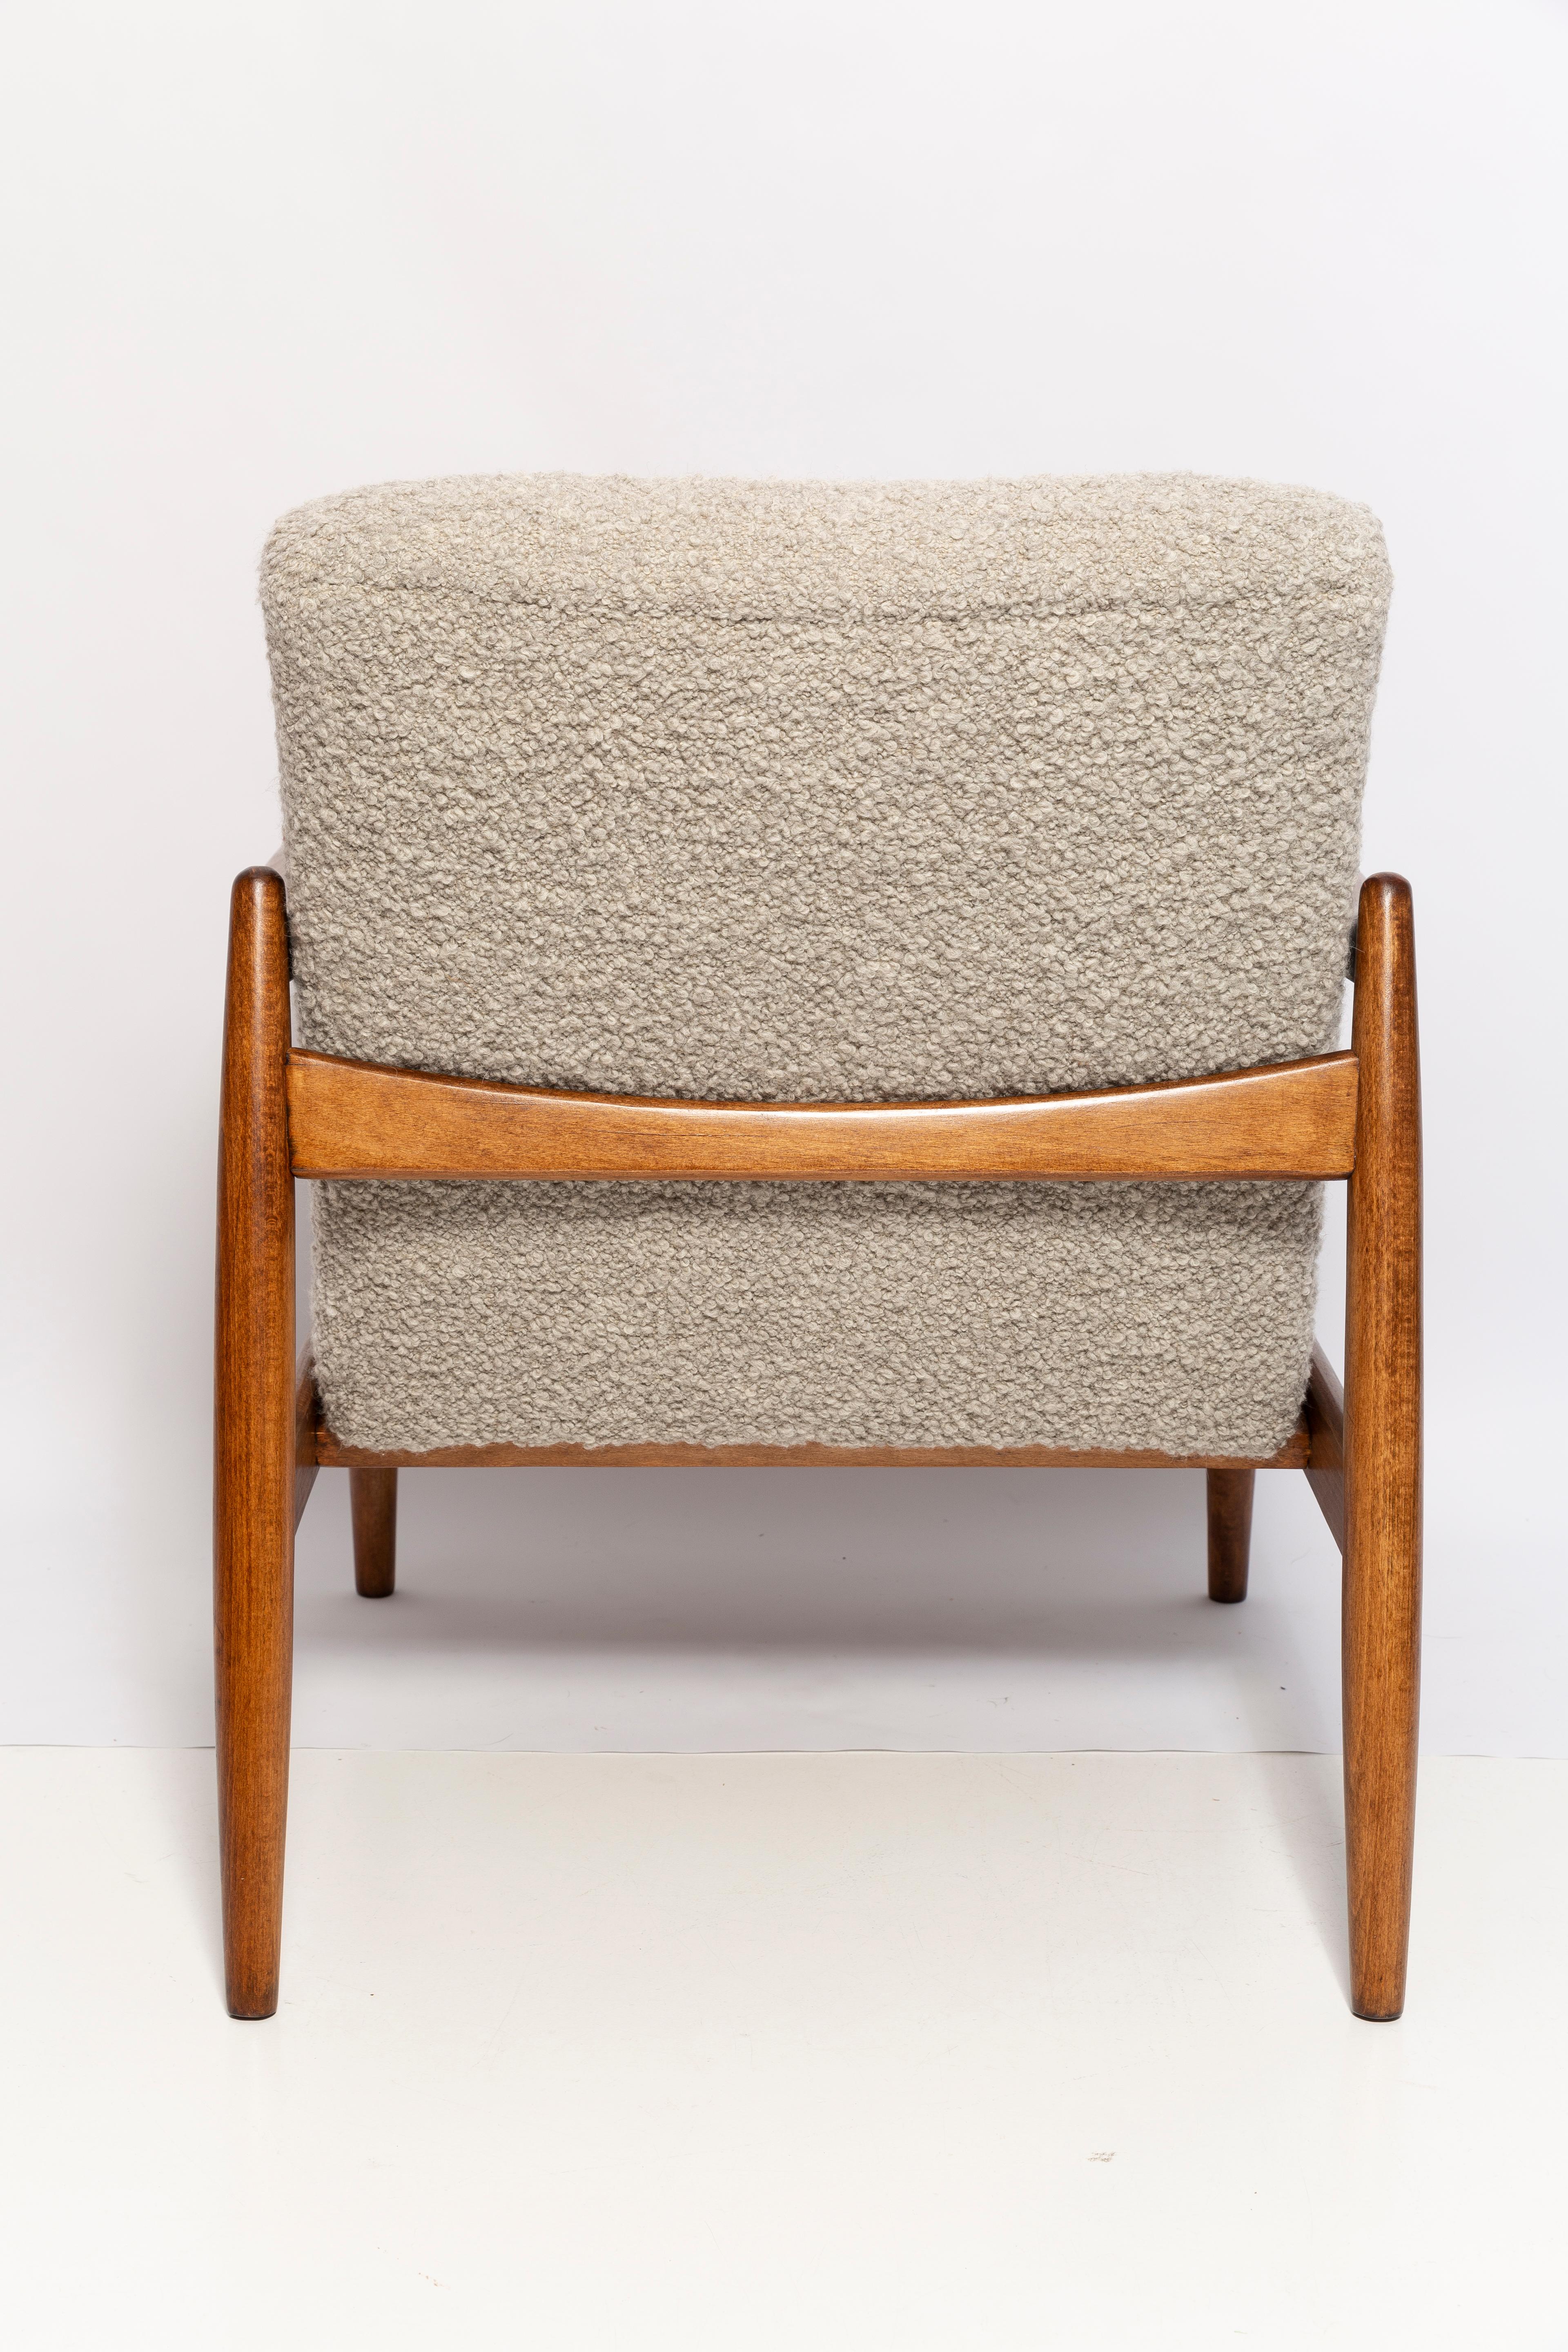 Set of Two Midcentury Gray Alpaca Wool Armchairs, Edmund Homa, Poland, 1960s For Sale 4